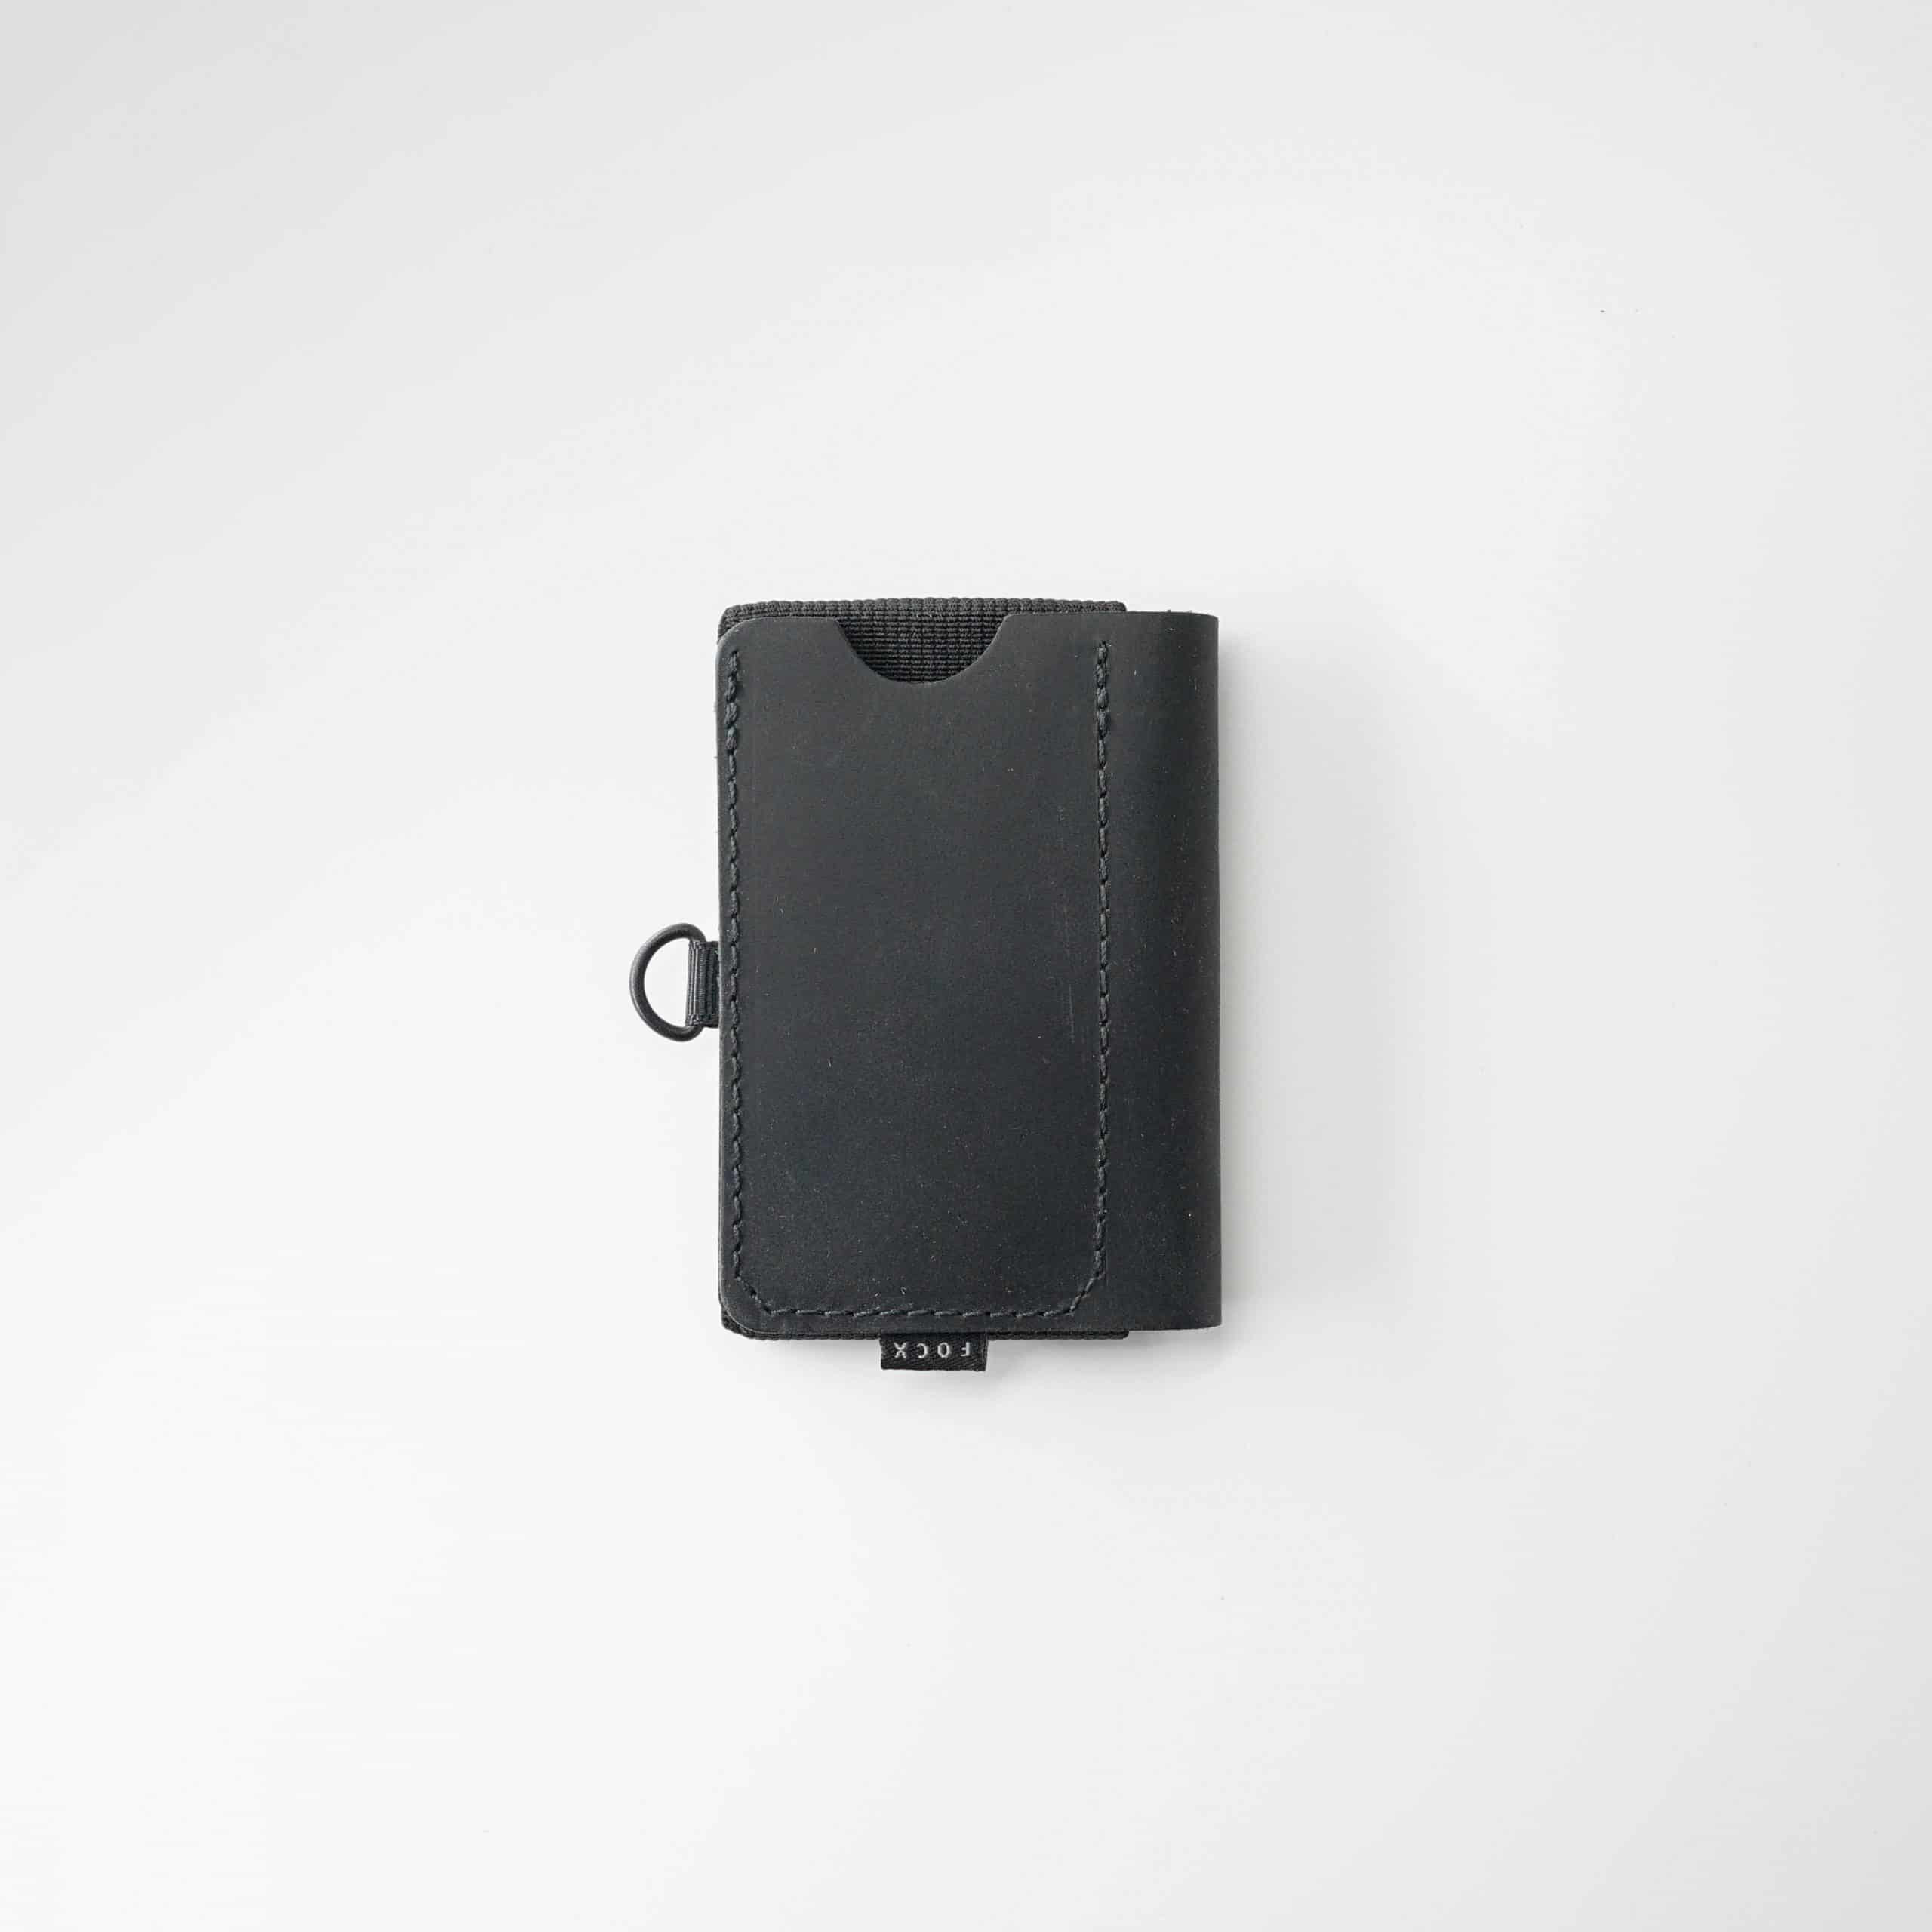 FOCX C1 Essential - The minimal NFC Wallet - Storming Gravity